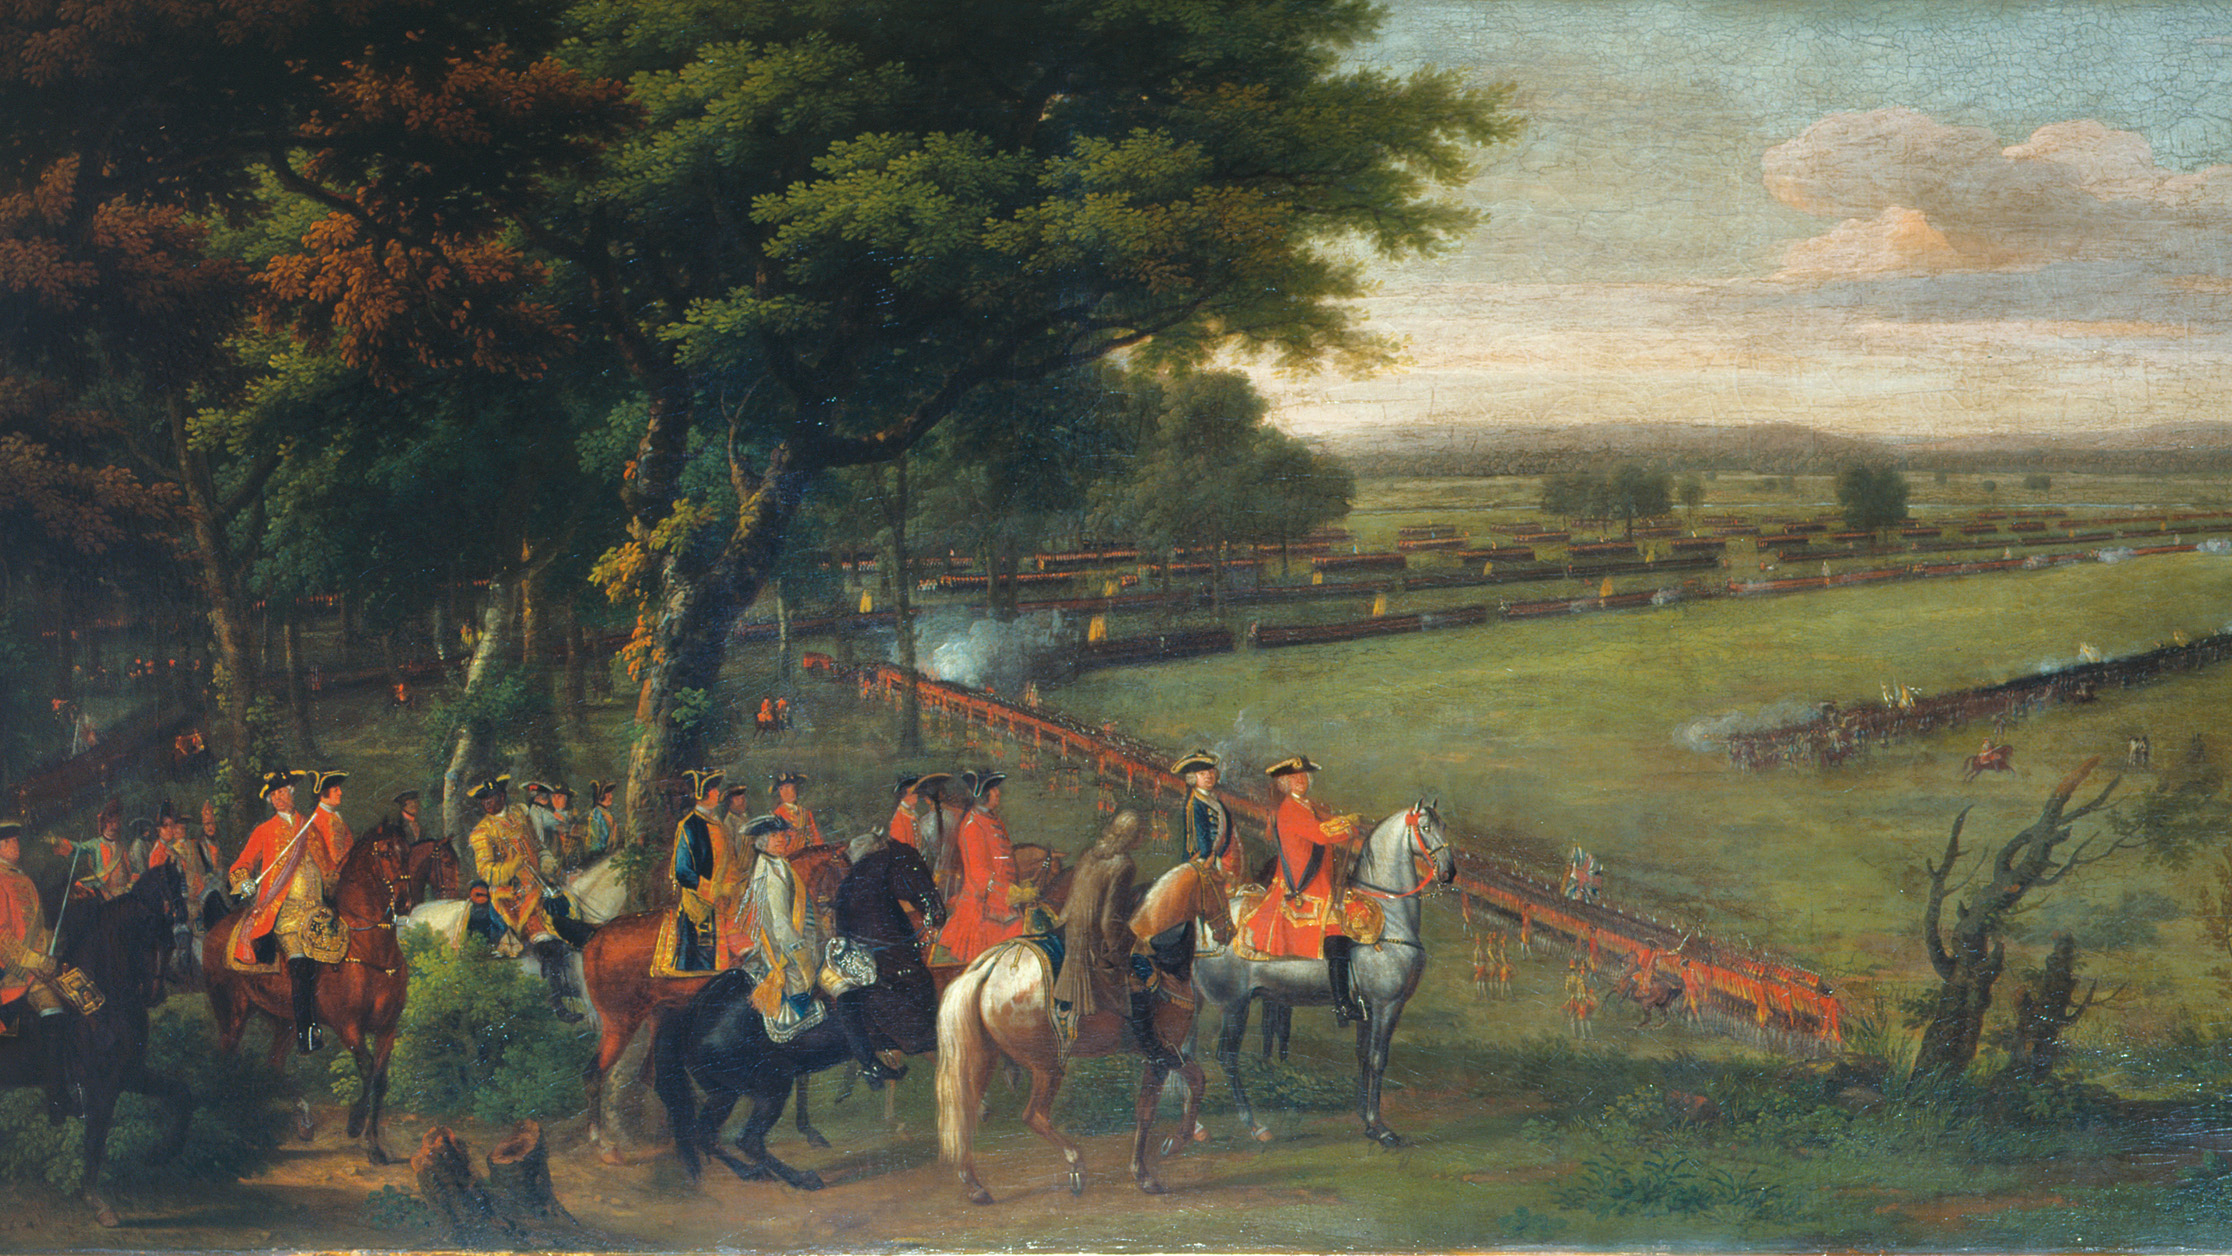 King George II is shown giving orders to his generals in a period painting of the Battle of Dettingen. Puffs of white smoke are visible as individual companies discharge their muskets into the opposing enemy ranks. Like many period renderings of linear warfare, this painting by David Morier fails to convey the chaos of battle.